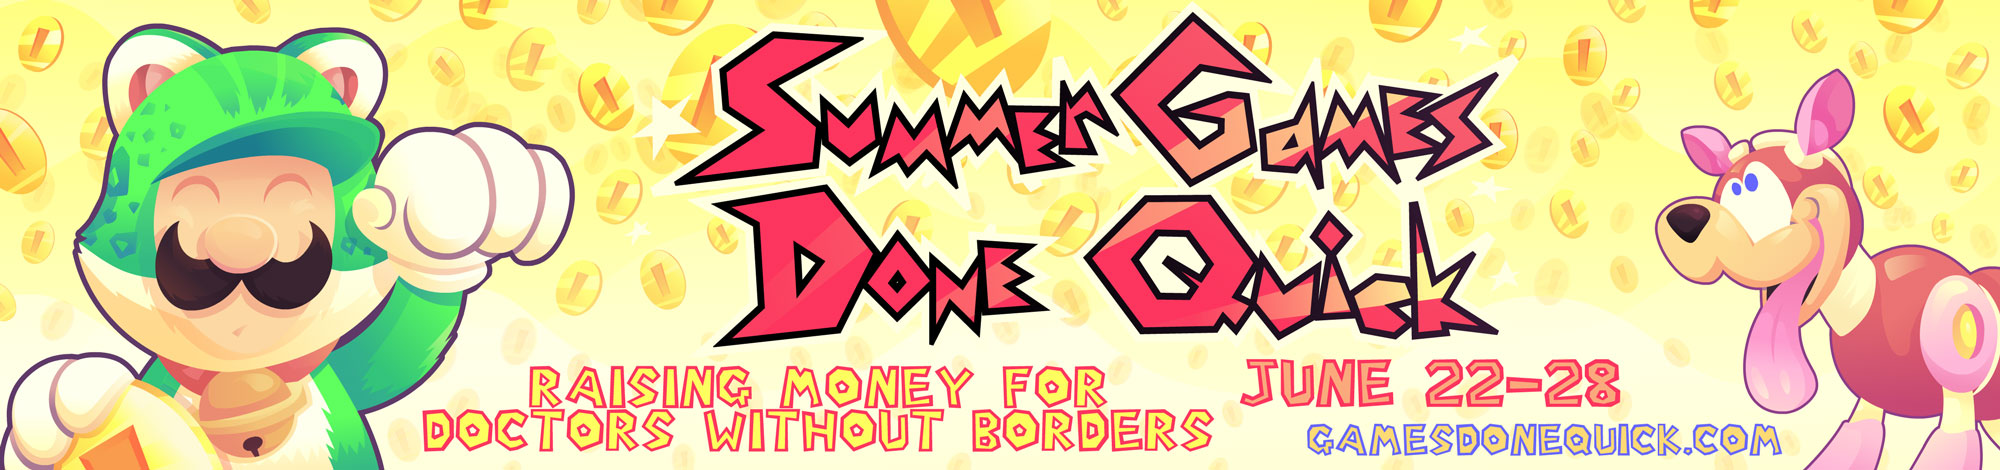 Artistry in Games sgdq Summer Games Done Quick 2014 Gets Off to Strong Start News  twitch sgdq news charity  